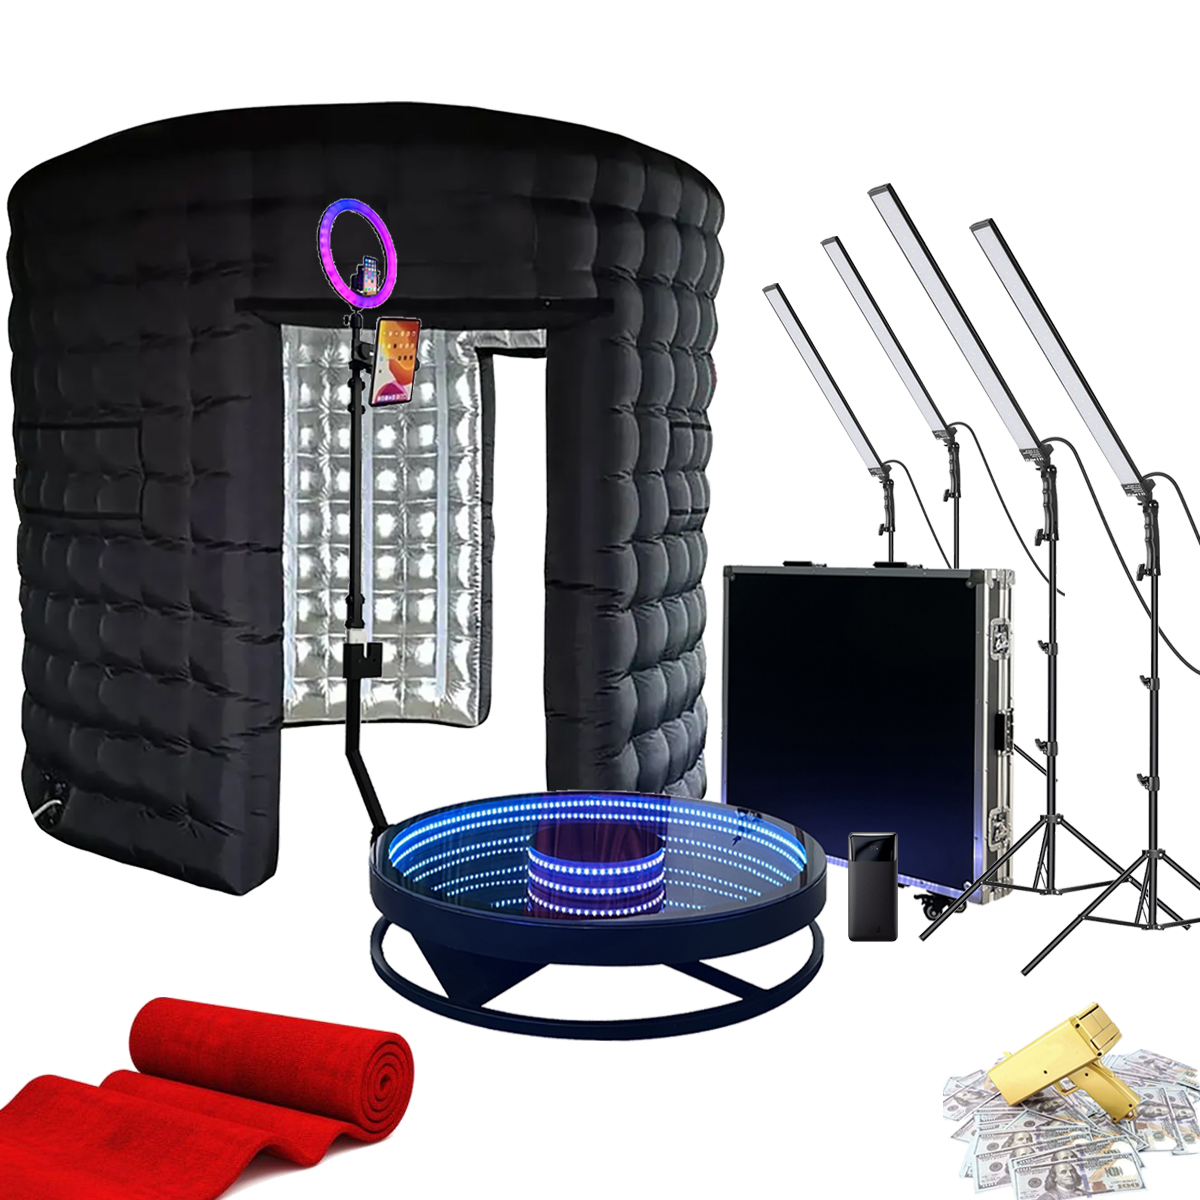 LED 360 Photo Booth Deluxe Package 1 - Photobooth Planet - Malvern, Pennsylvania -